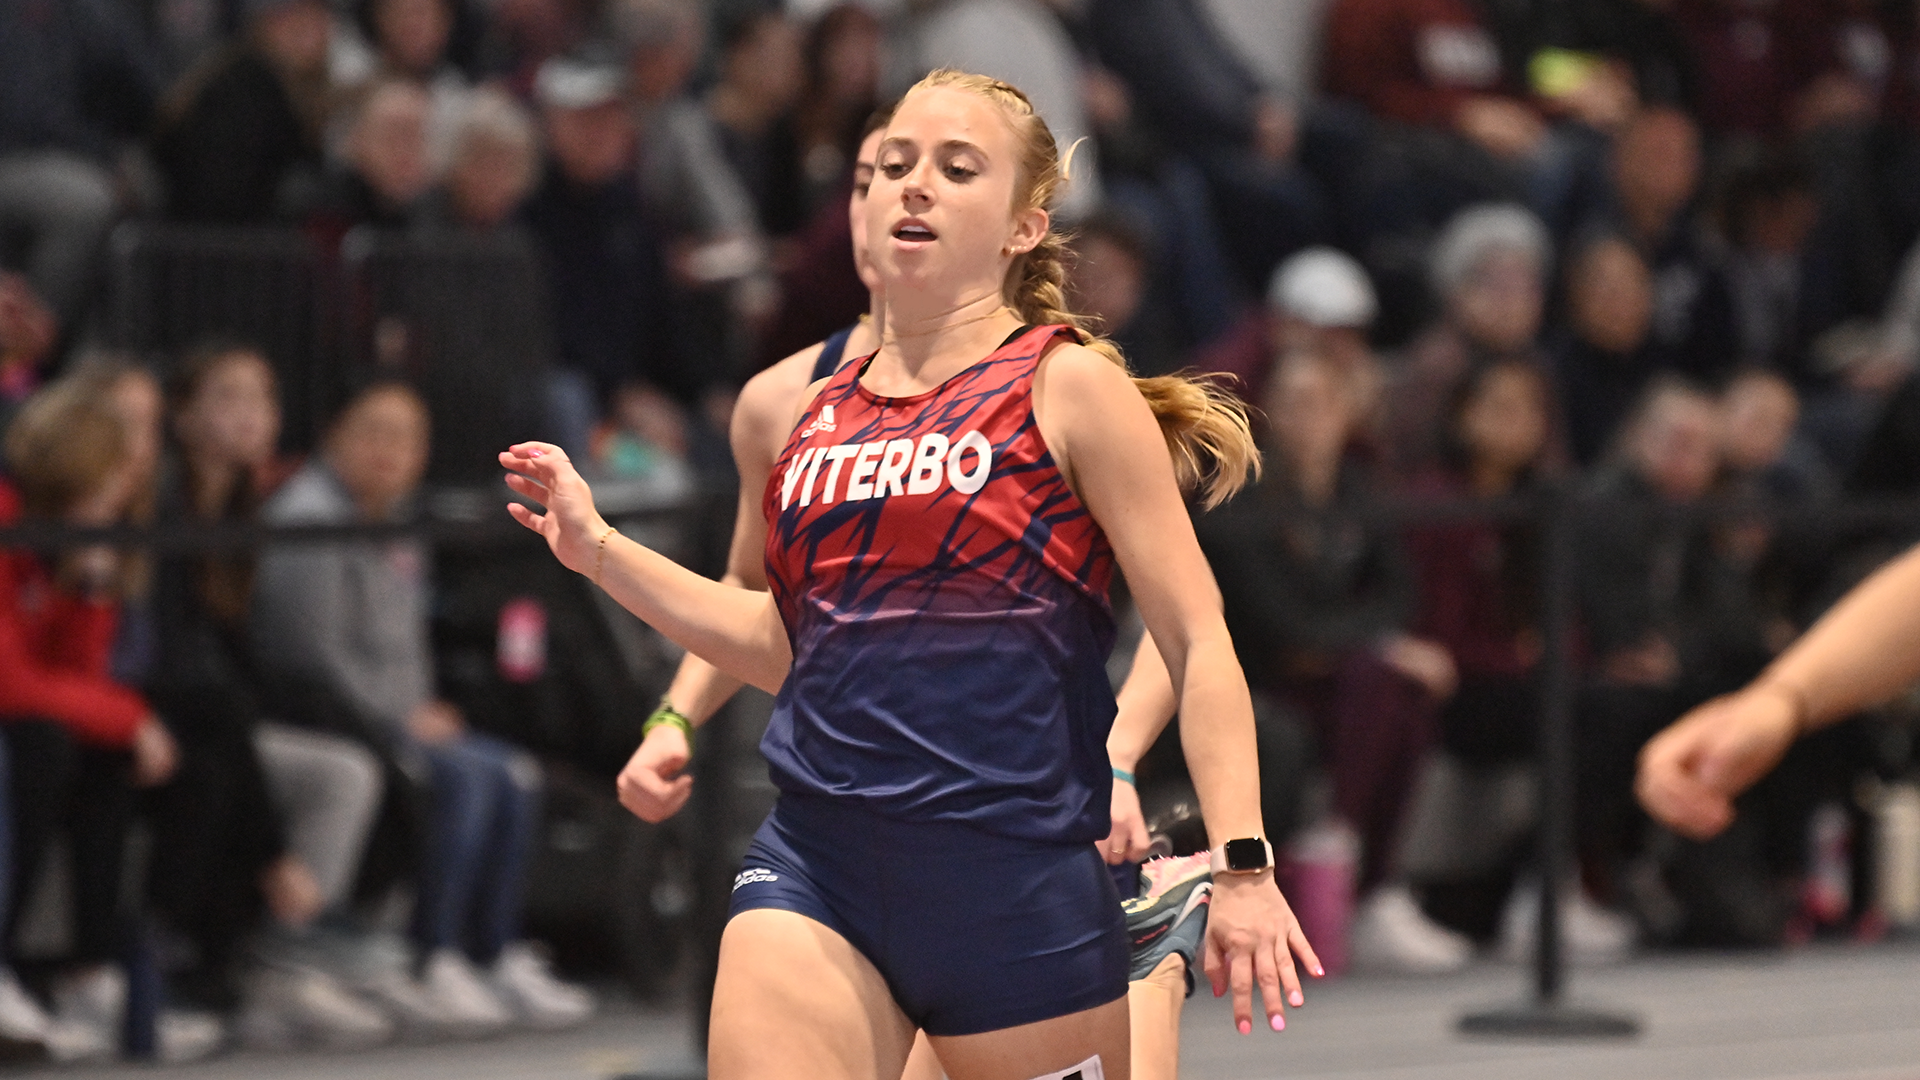 V-Hawks Compete at Minnesota Indoor Classic